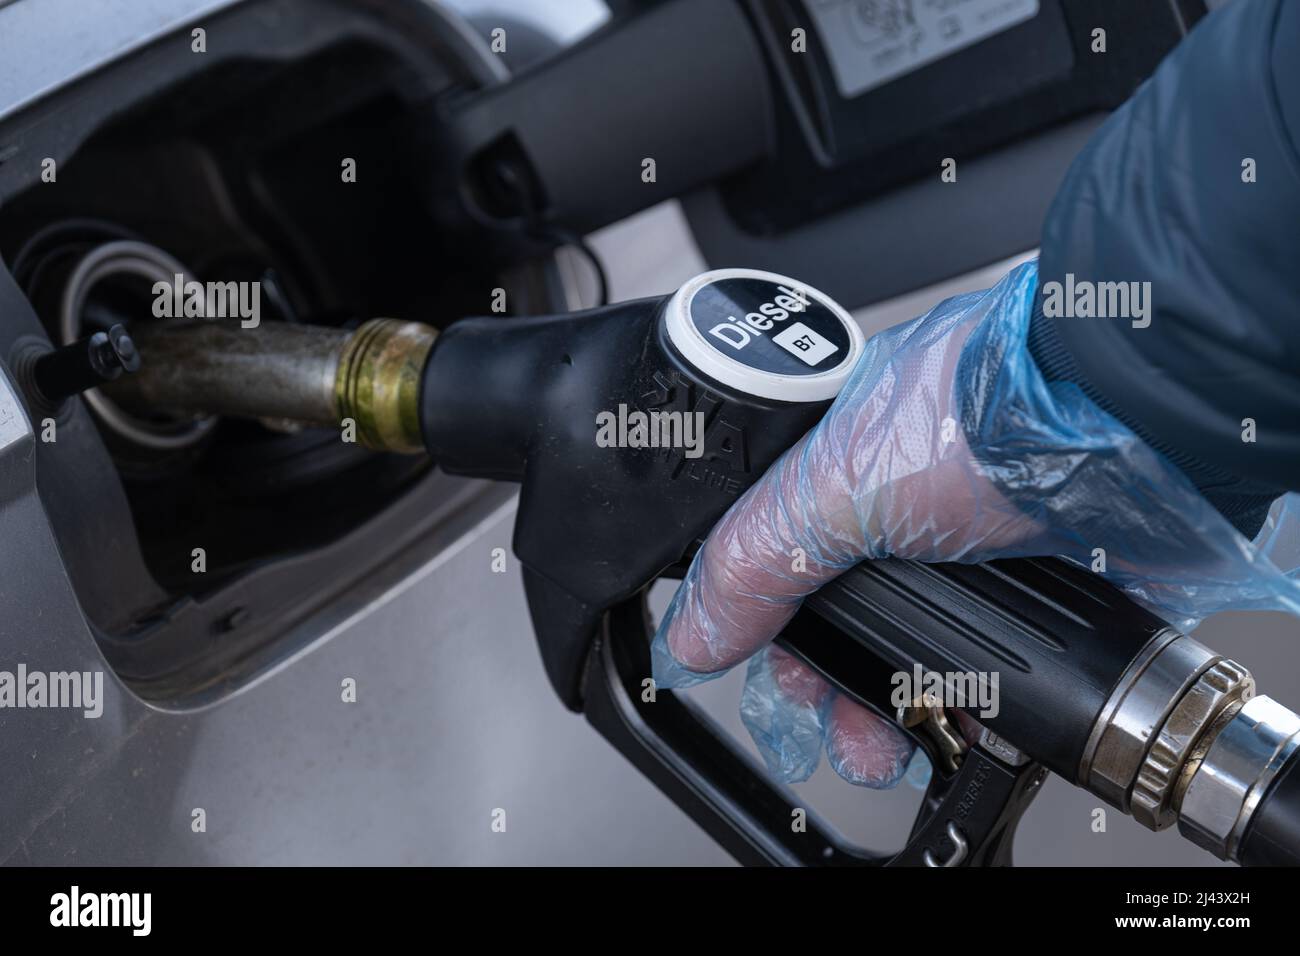 Diesel. Refueling the car.Refueling pistol in the hands of a man in a glove.A man fills up a tank with diesel fuel. Fuel price in Europe. Stock Photo